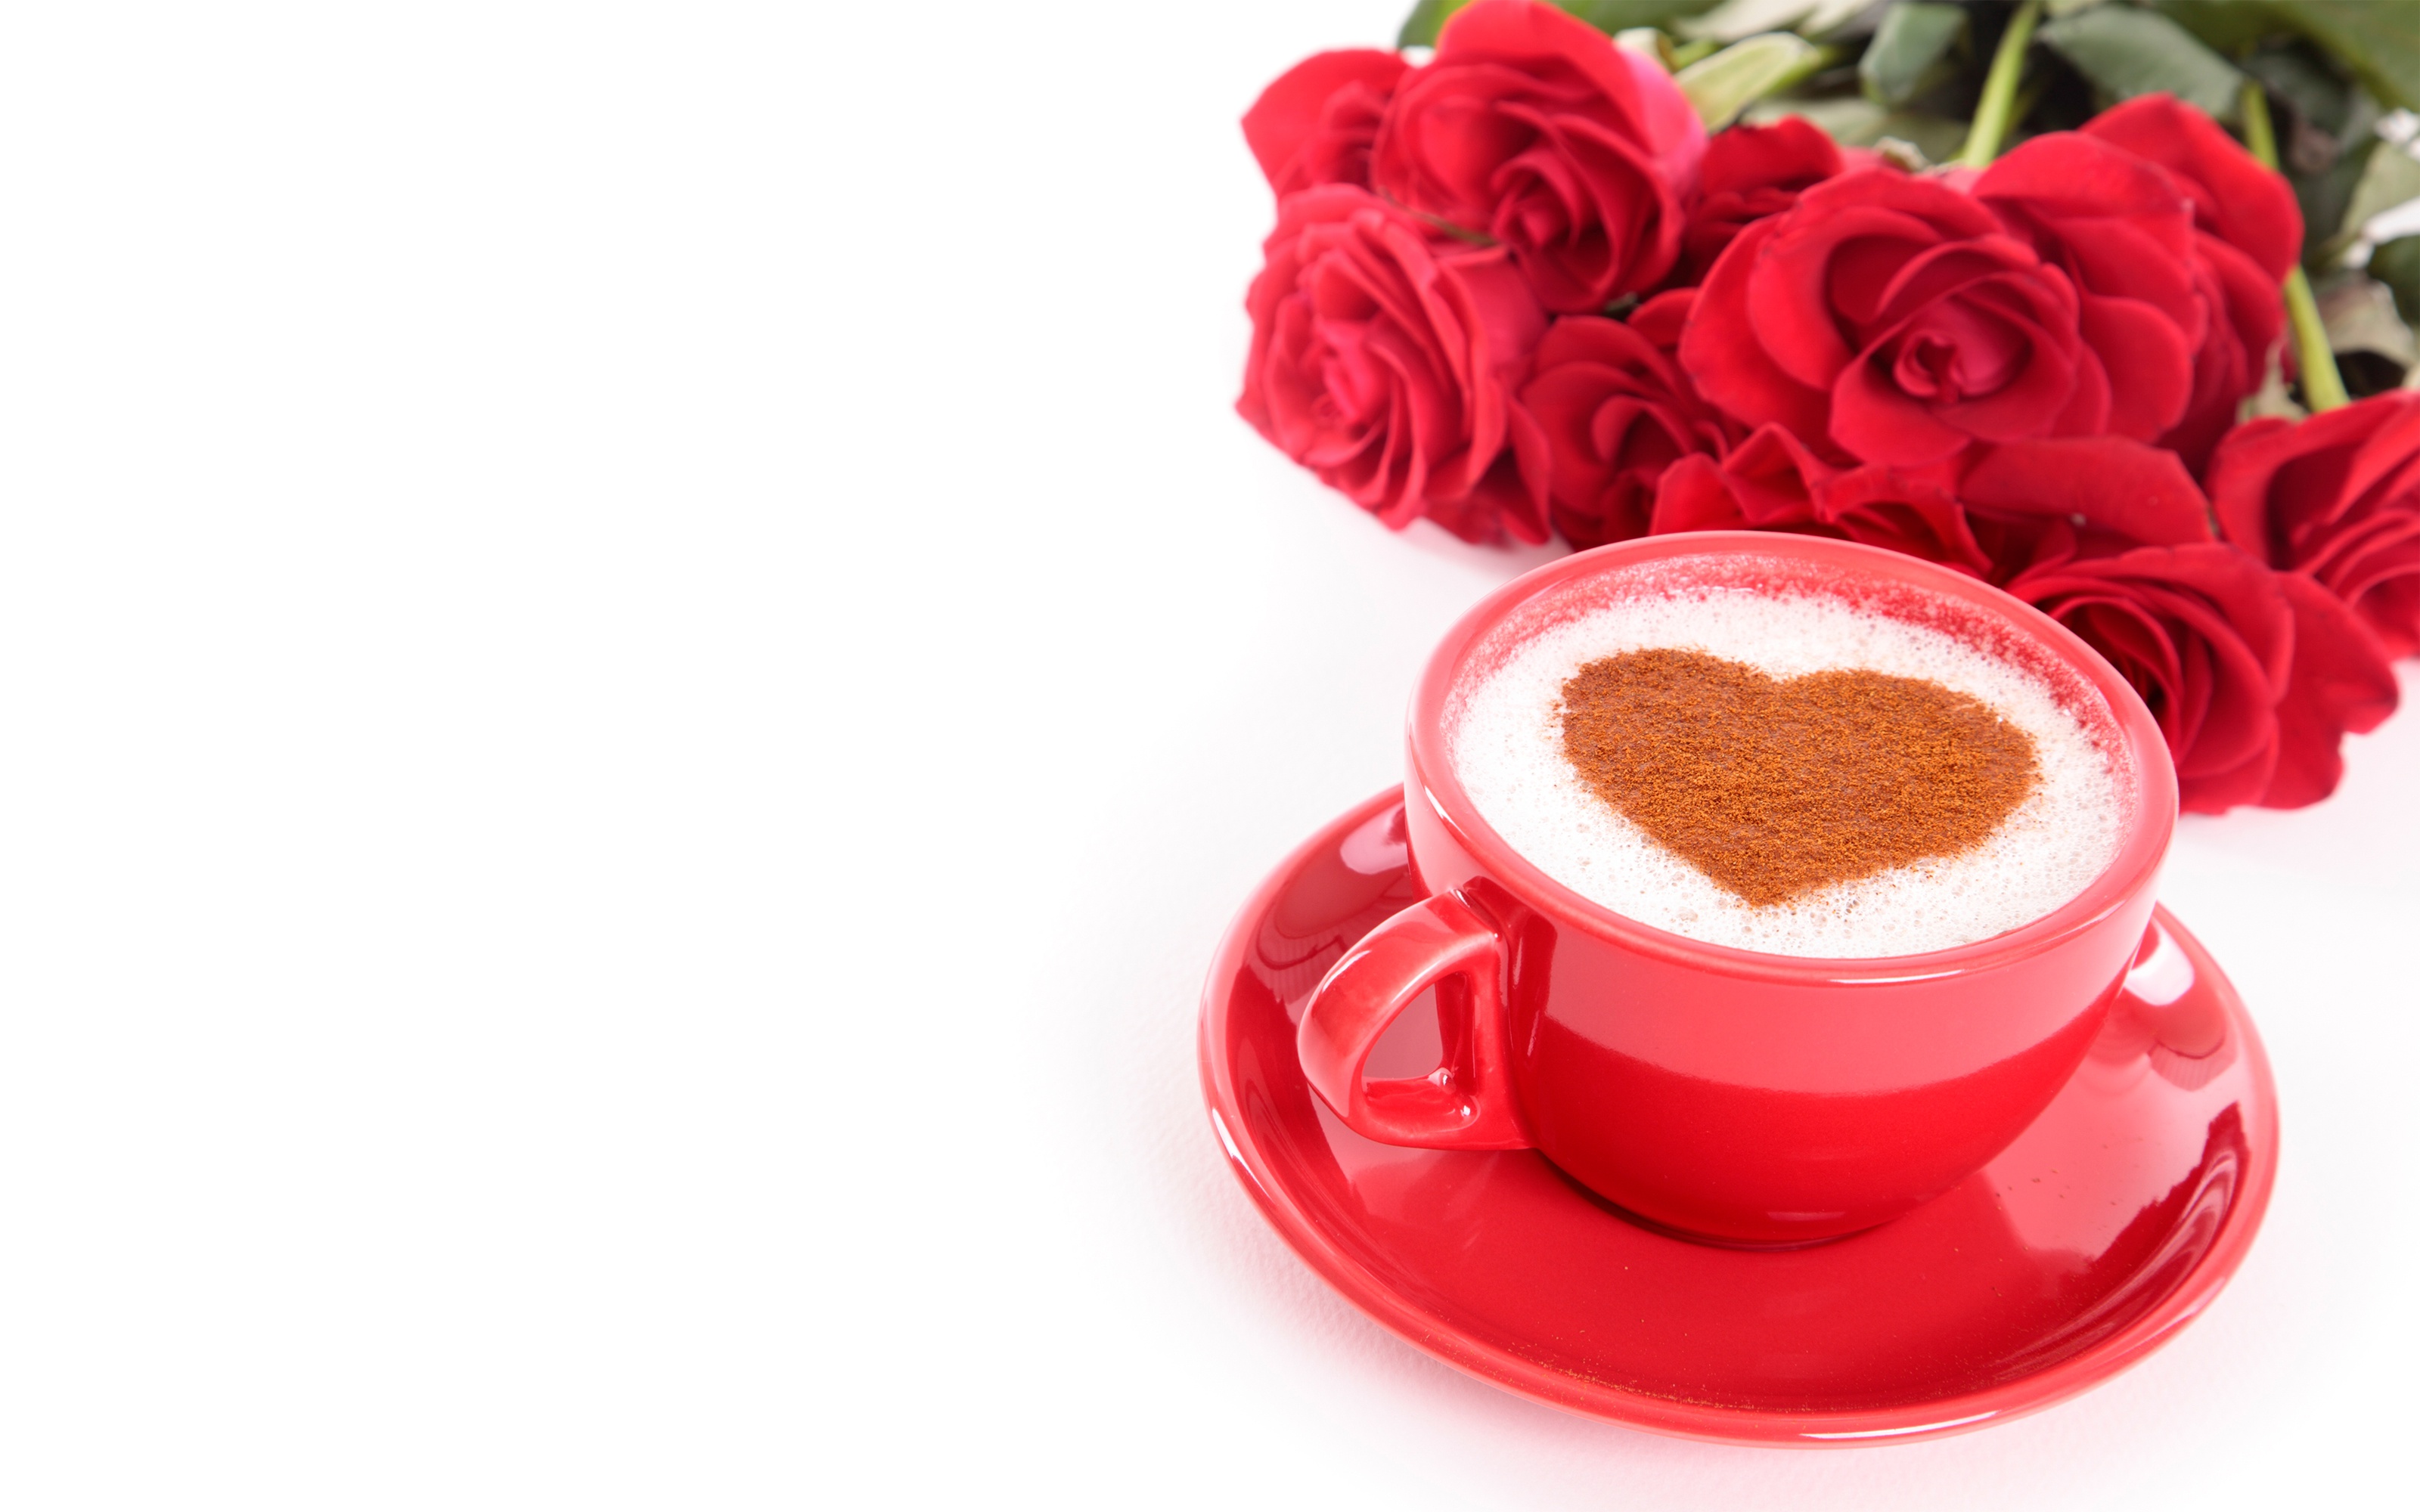 Cup Heart Shaped Rose Red Rose Romantic 3200x2000